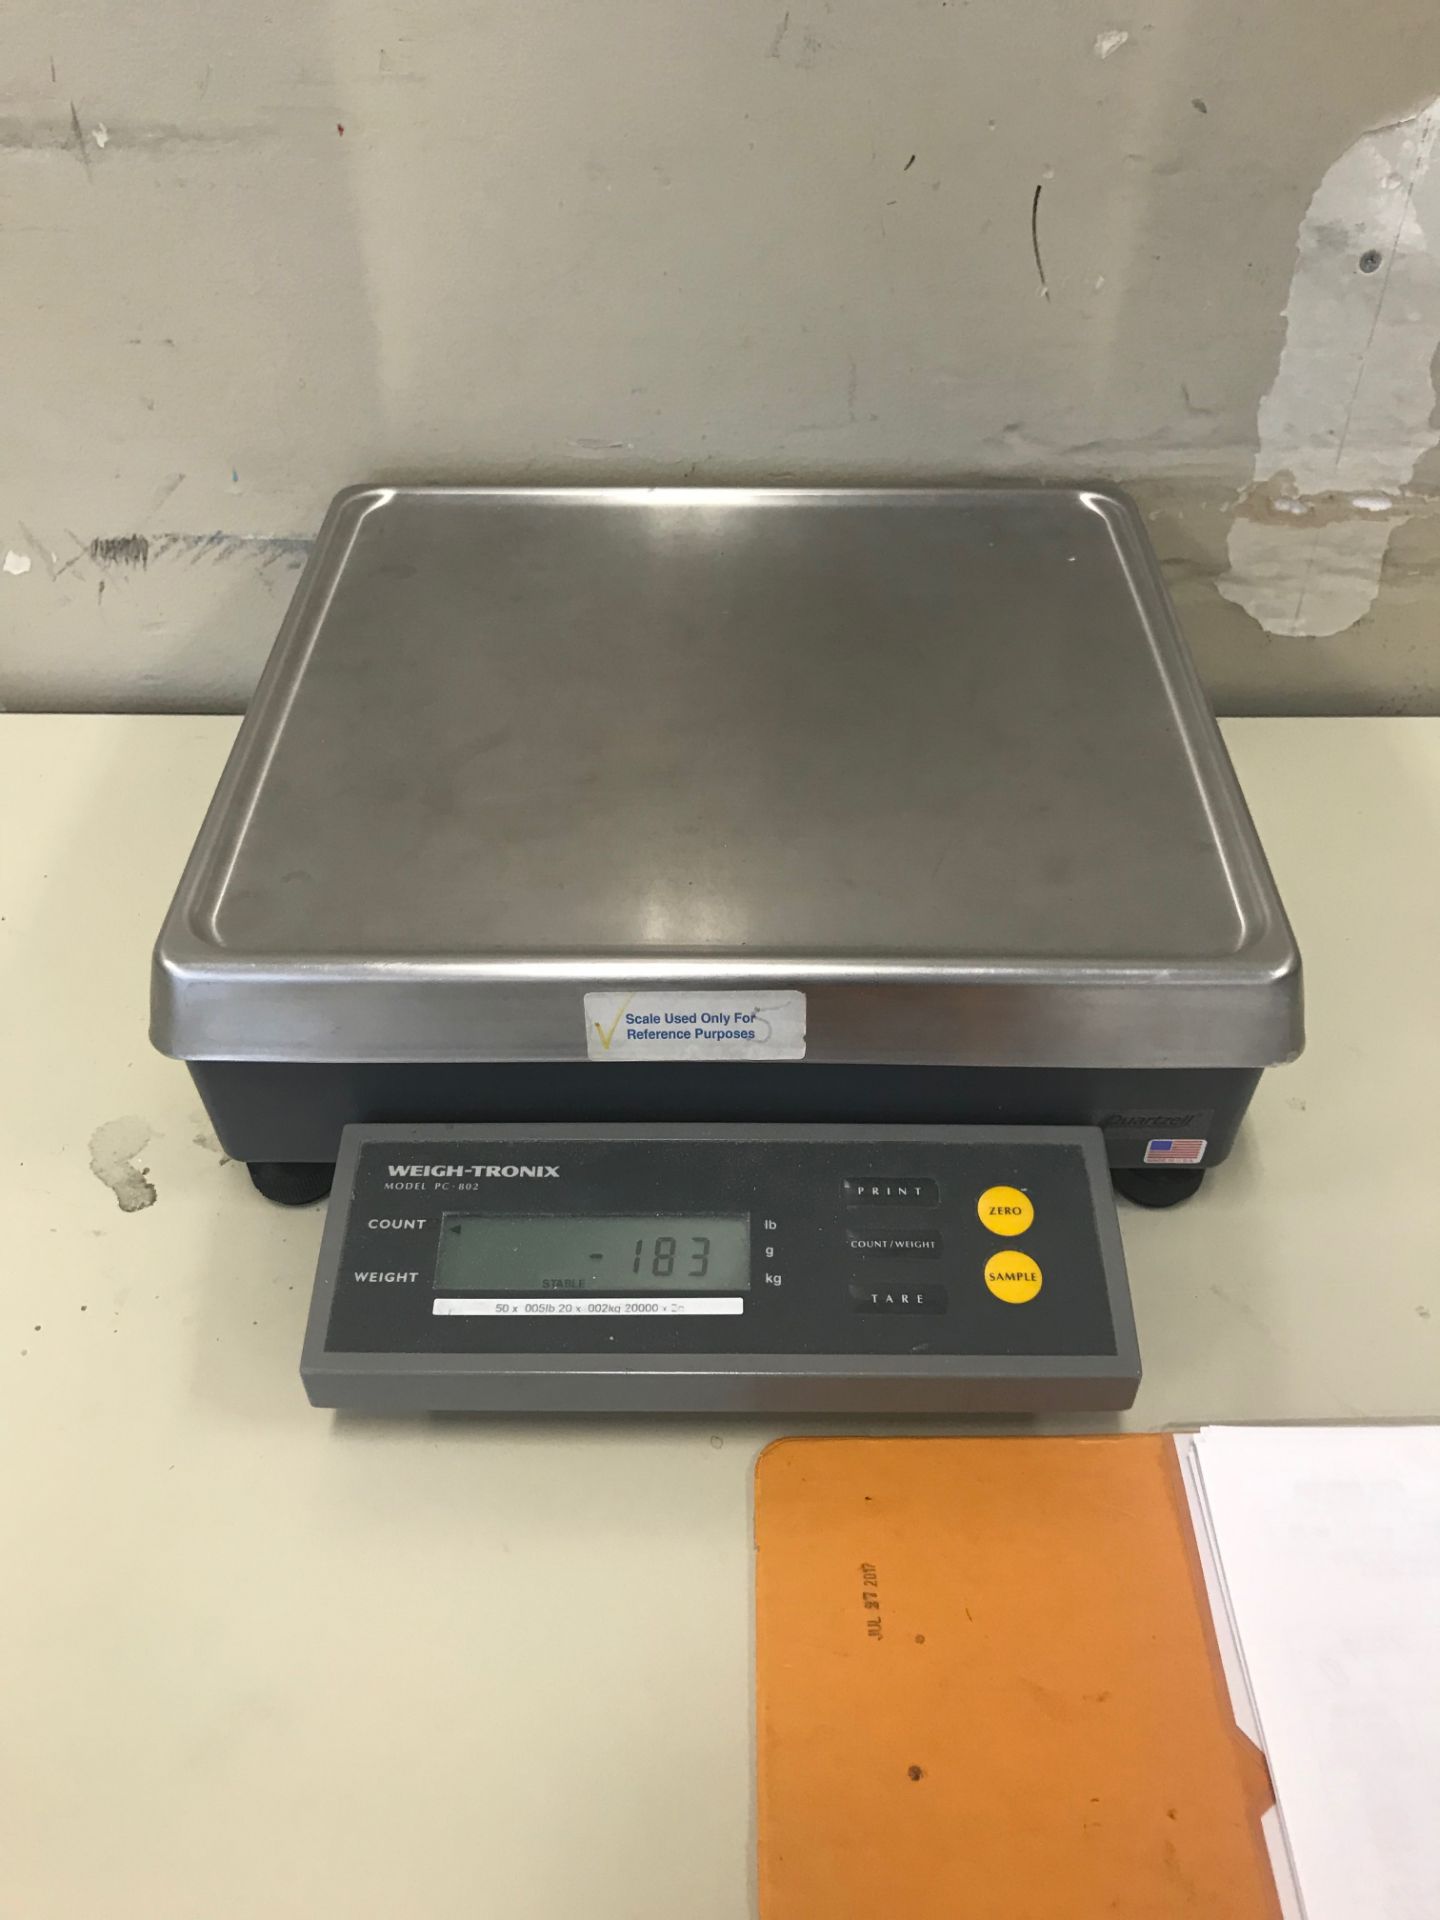 Weigh-Tronix Scale, Model# PC-802B-25, Serial# SRL9001545 B, Max Weight 50 lbs, 14 in long x 12 in